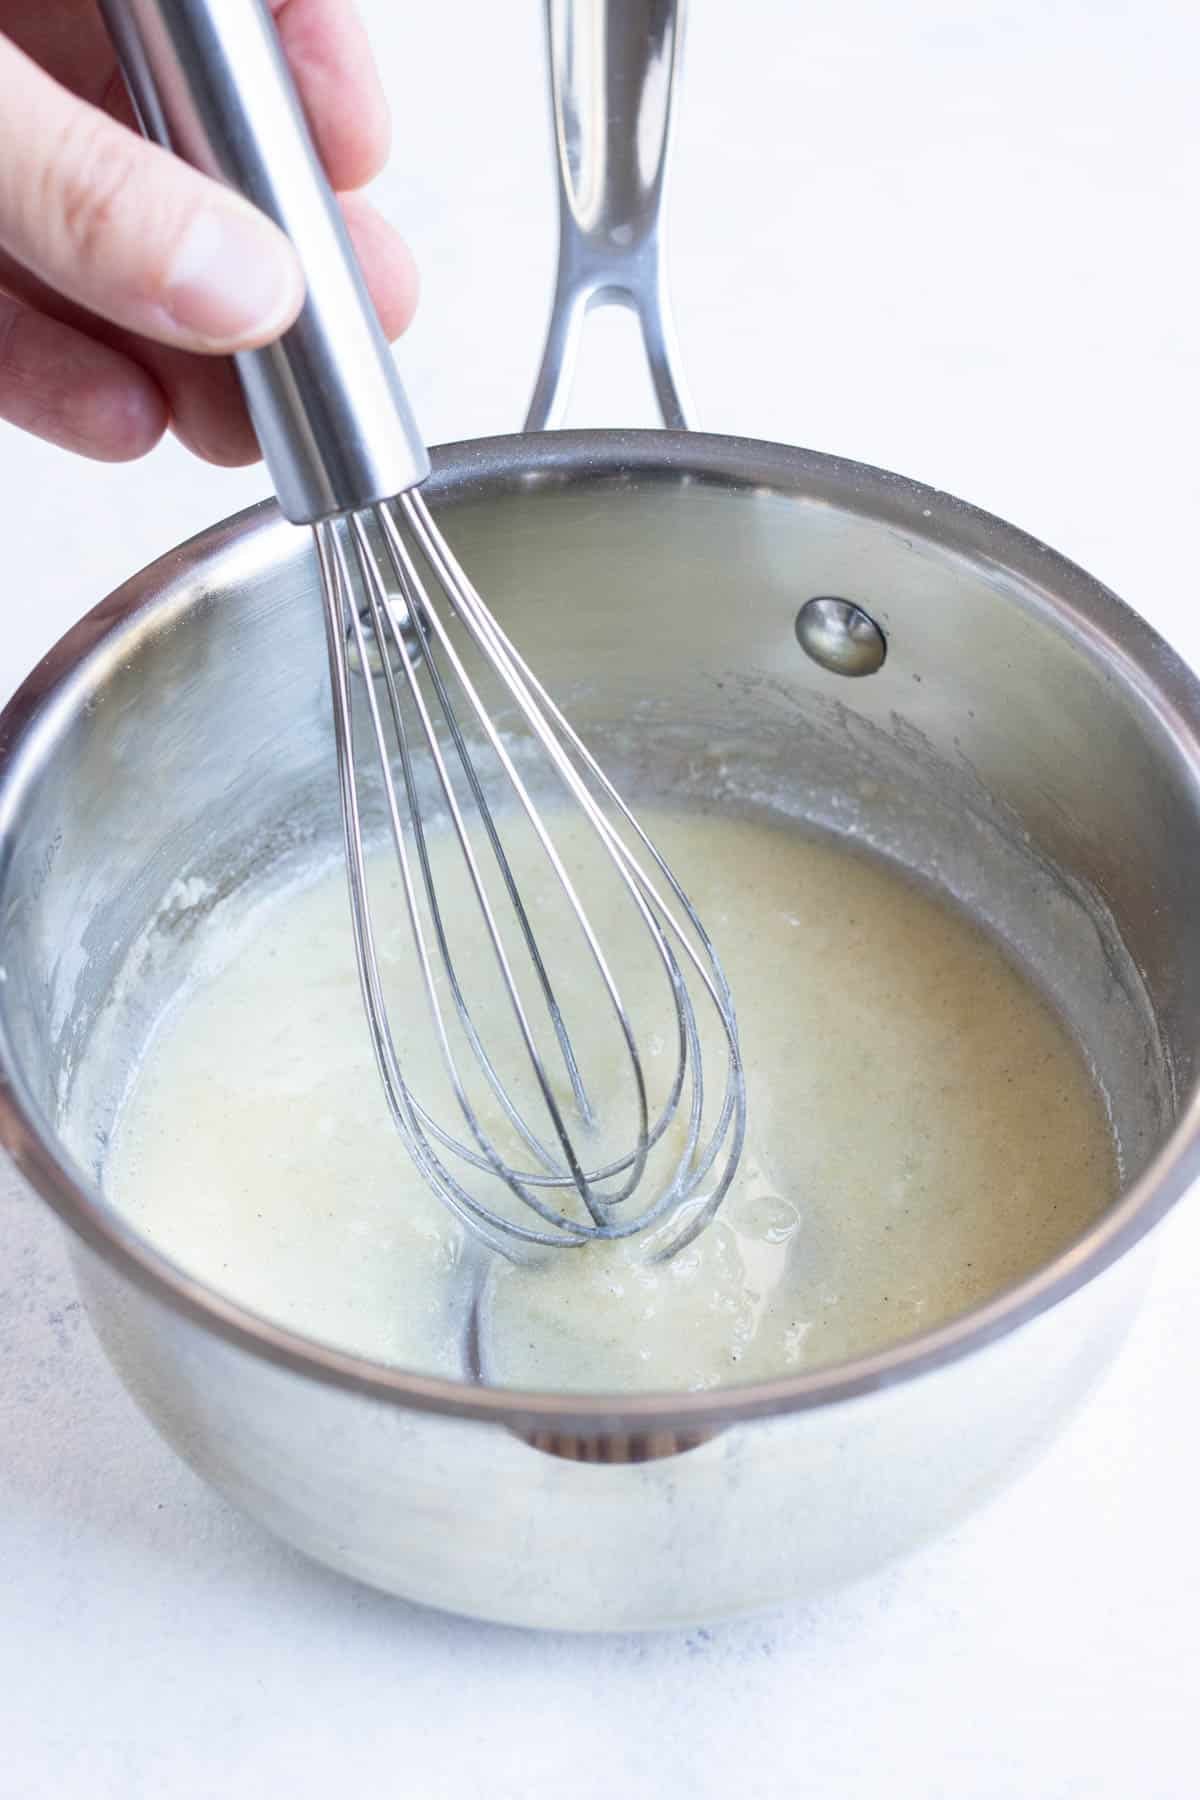 Milk is whisked into a roux.